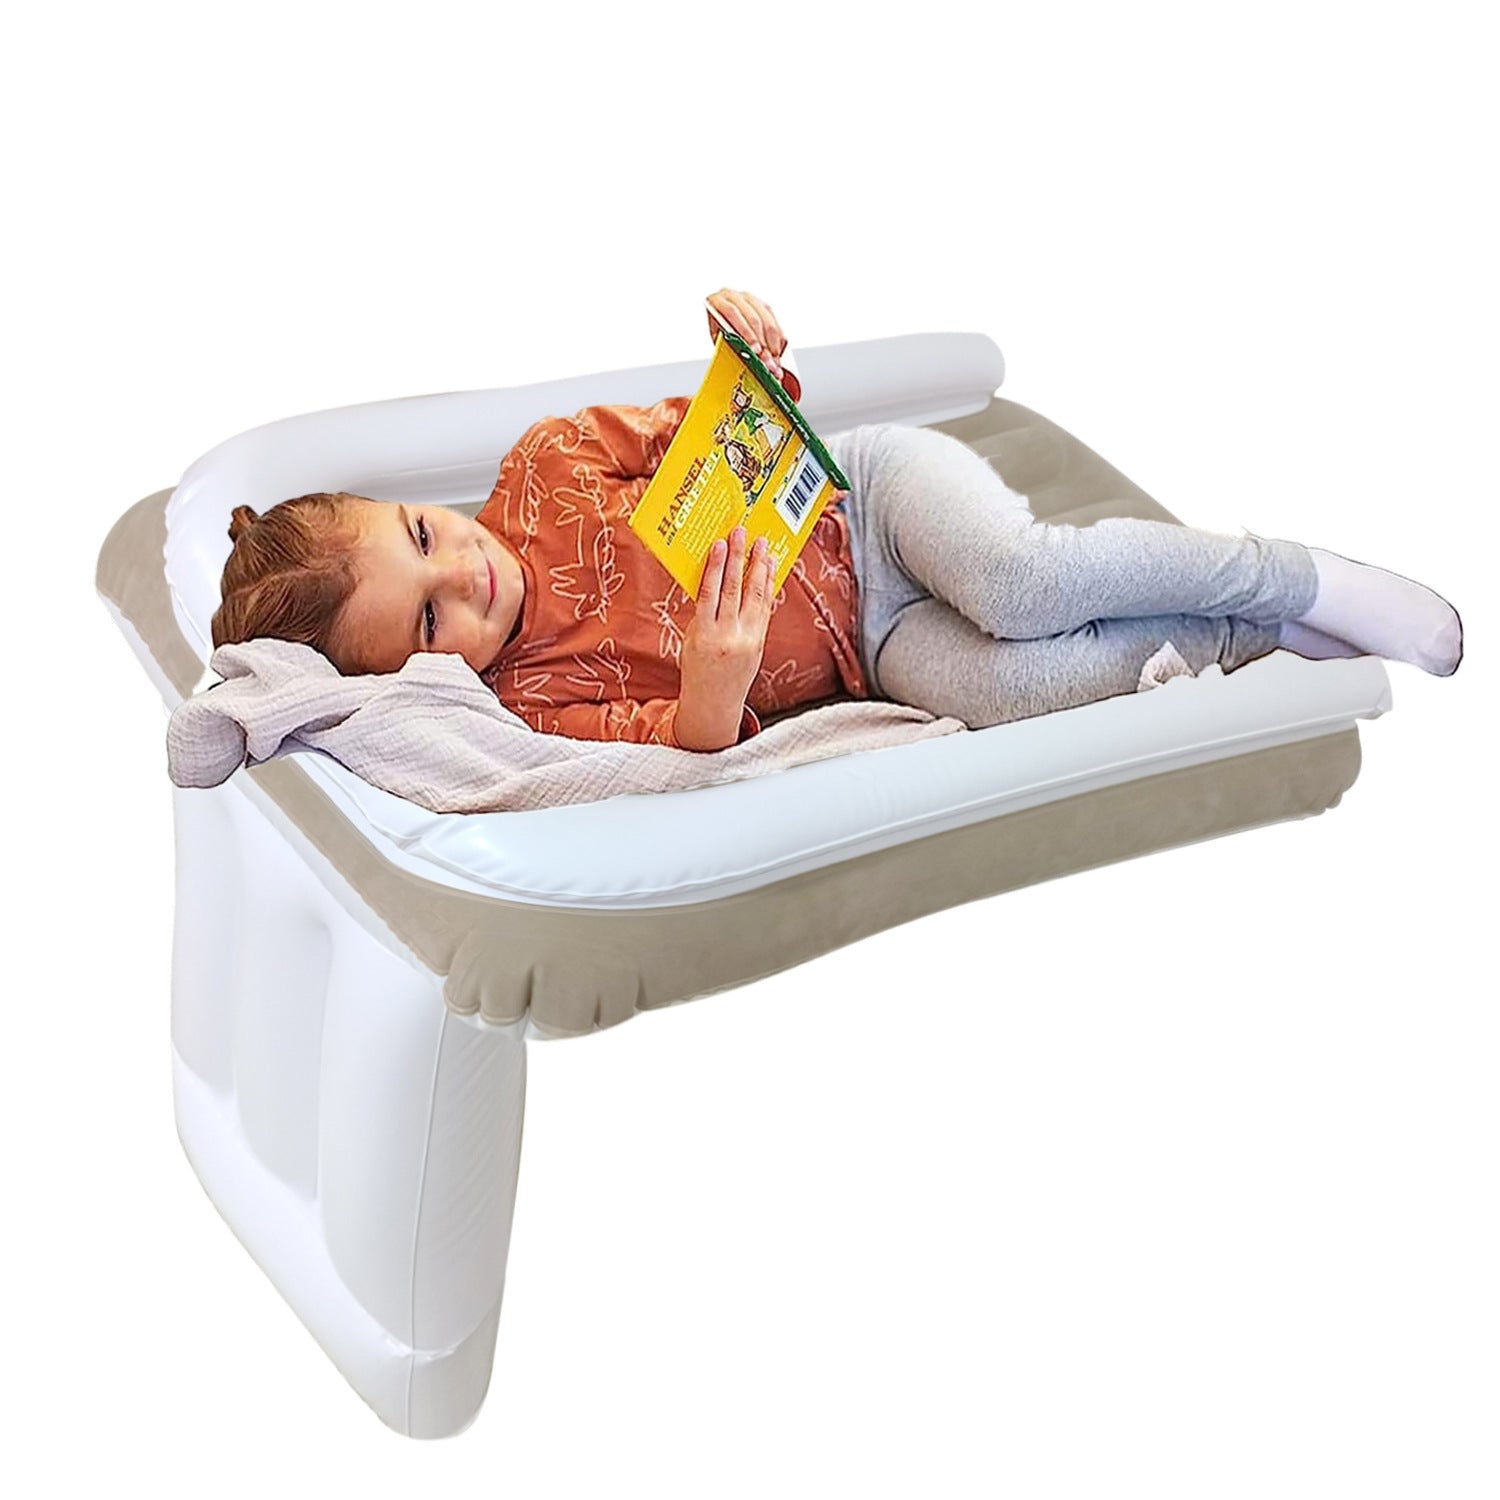 TravelNest | Safe and Comfortable Sleep for Babies on the Go